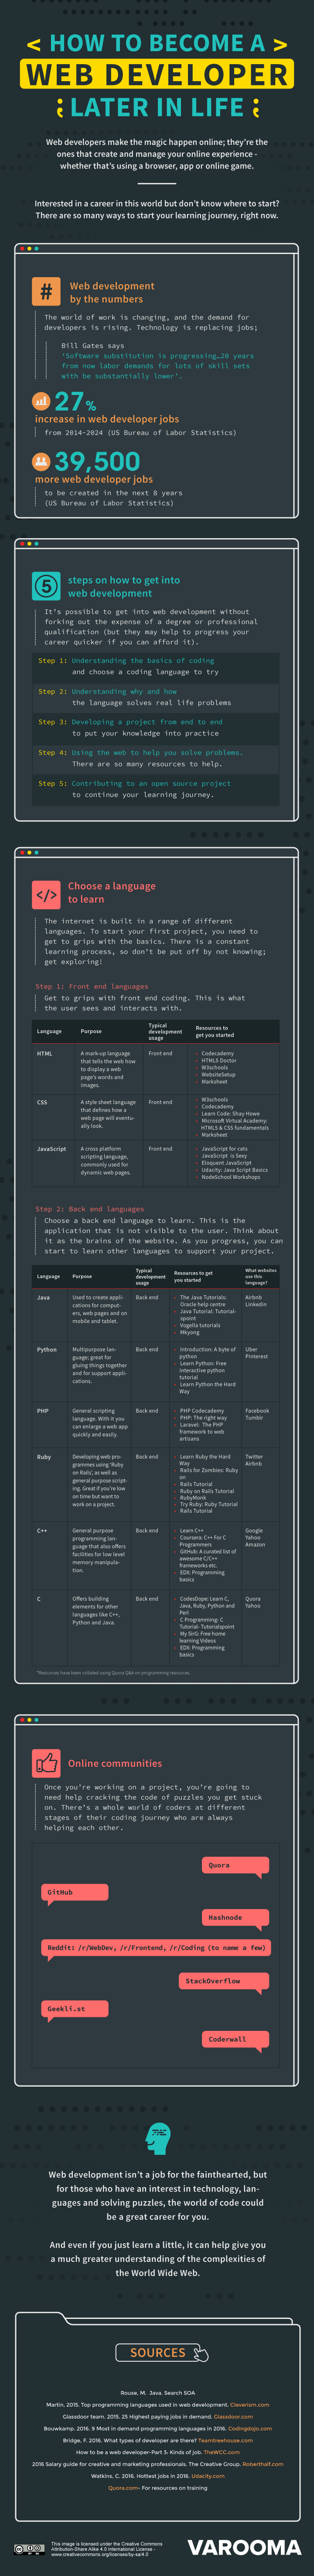 How to Become a Web Developer Later in Life - #Infographic